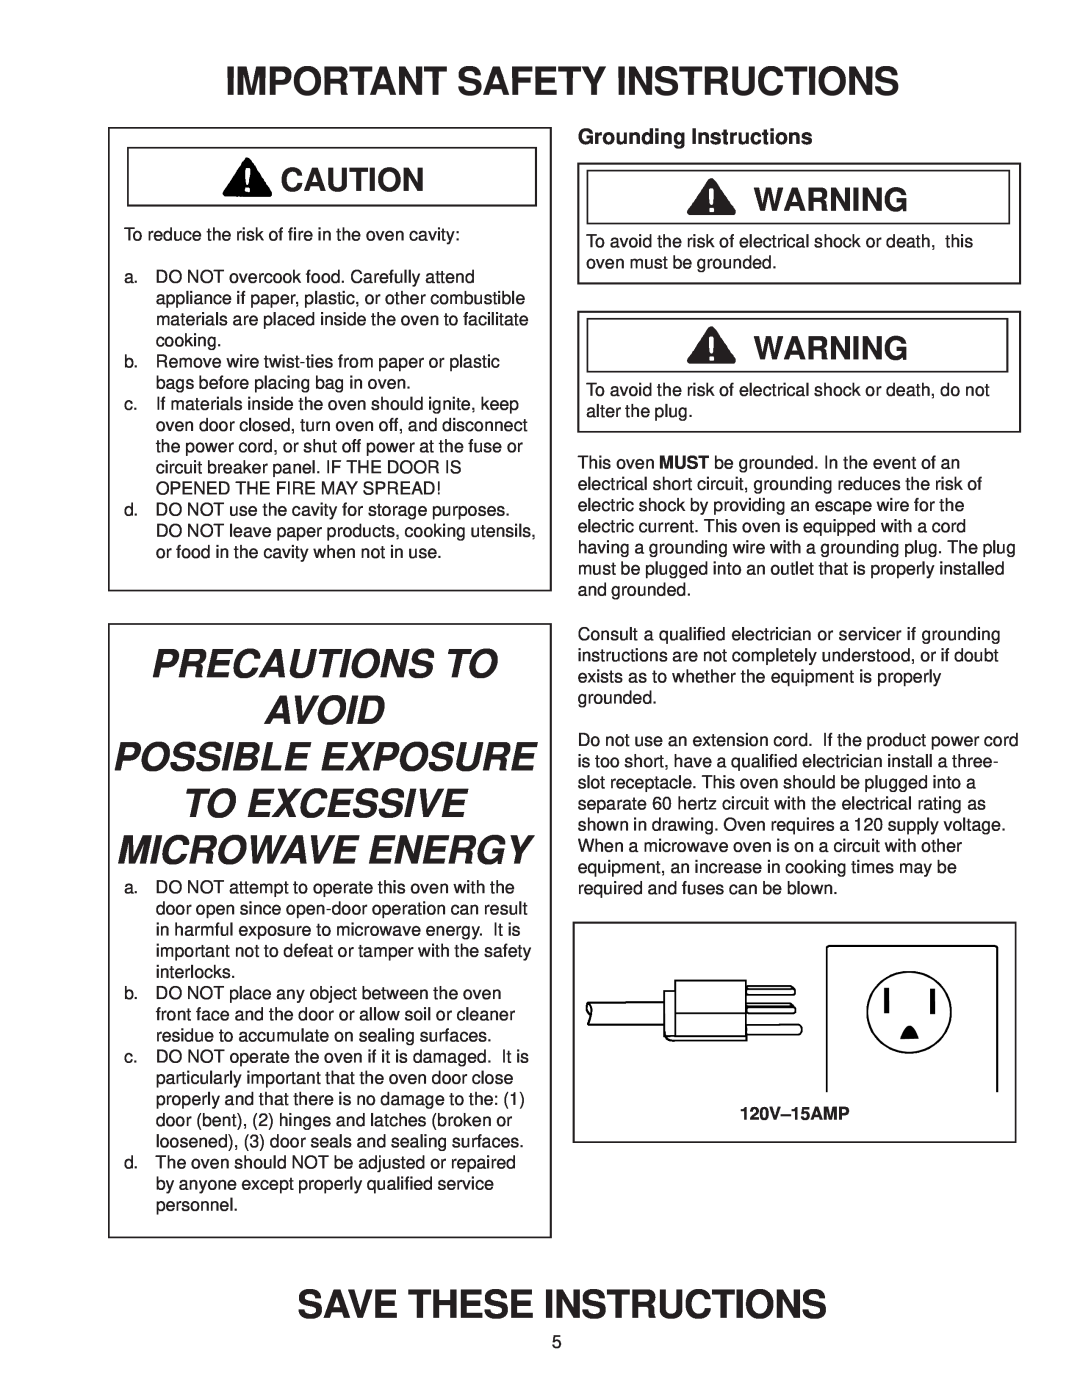 Amana MVH230 Important Safety Instructions, Precautions To Avoid Possible Exposure, To Excessive Microwave Energy 